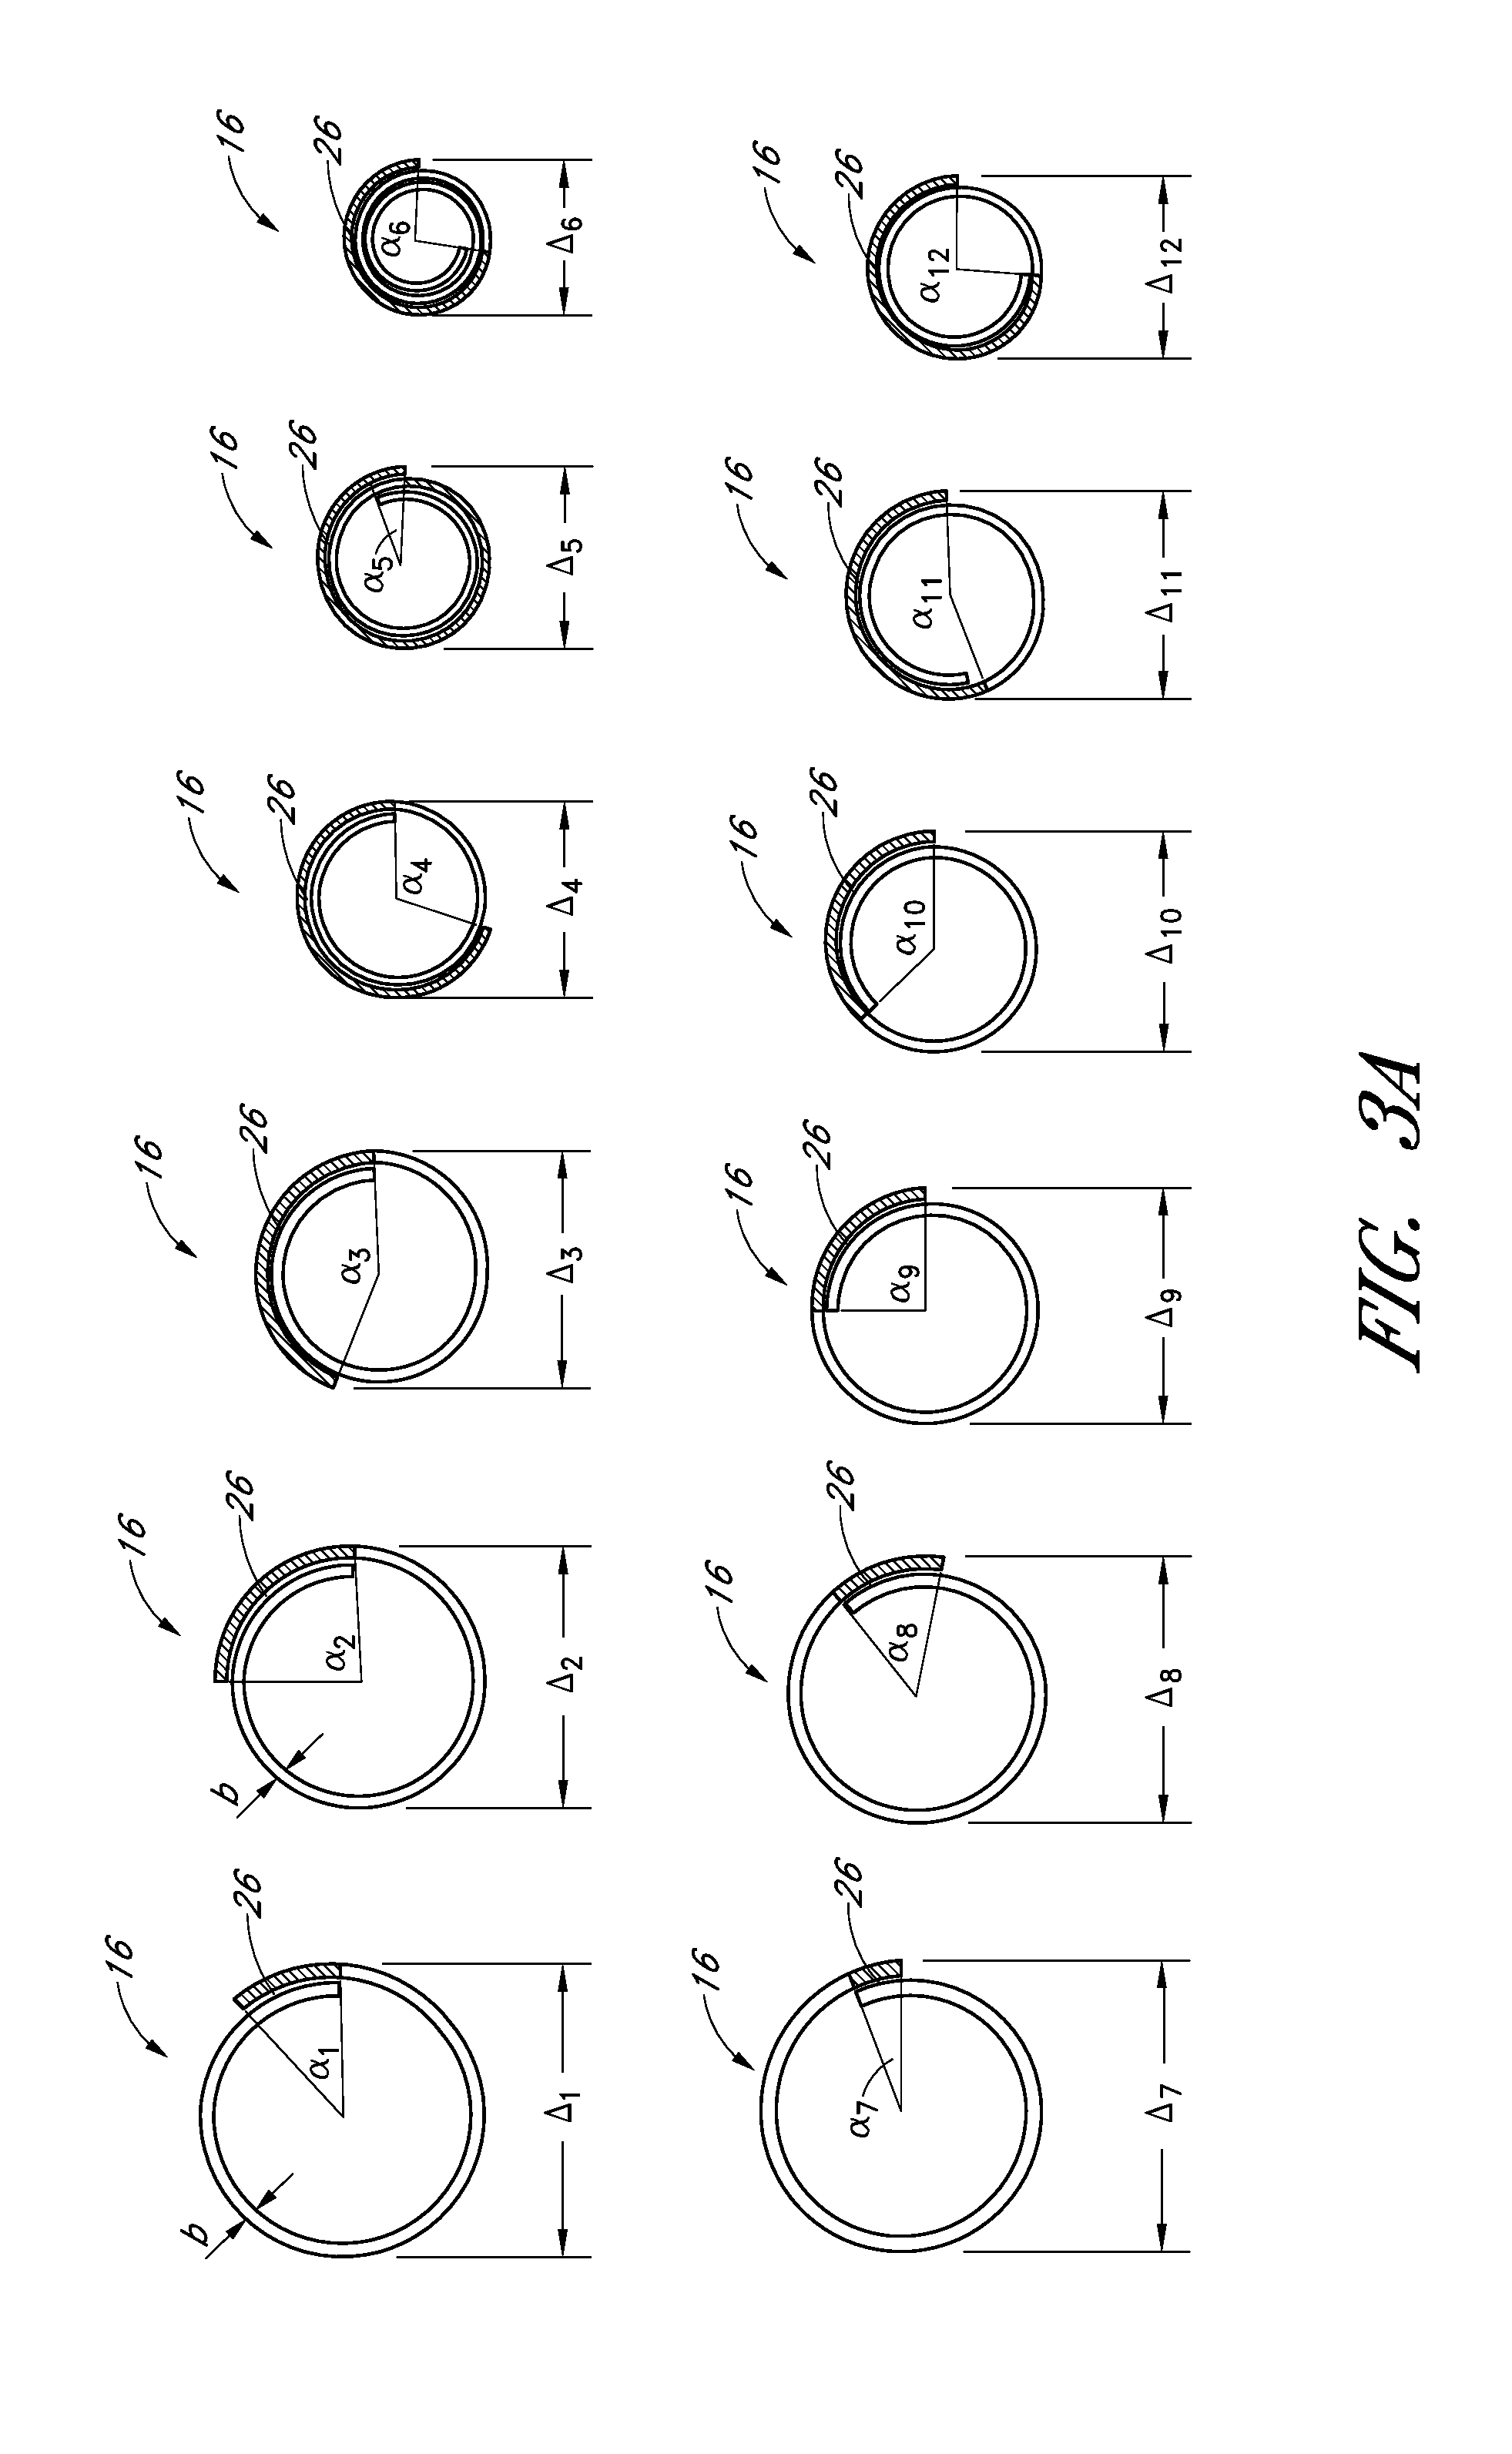 Methods and apparatuses for flow restoration and implanting members in the human body